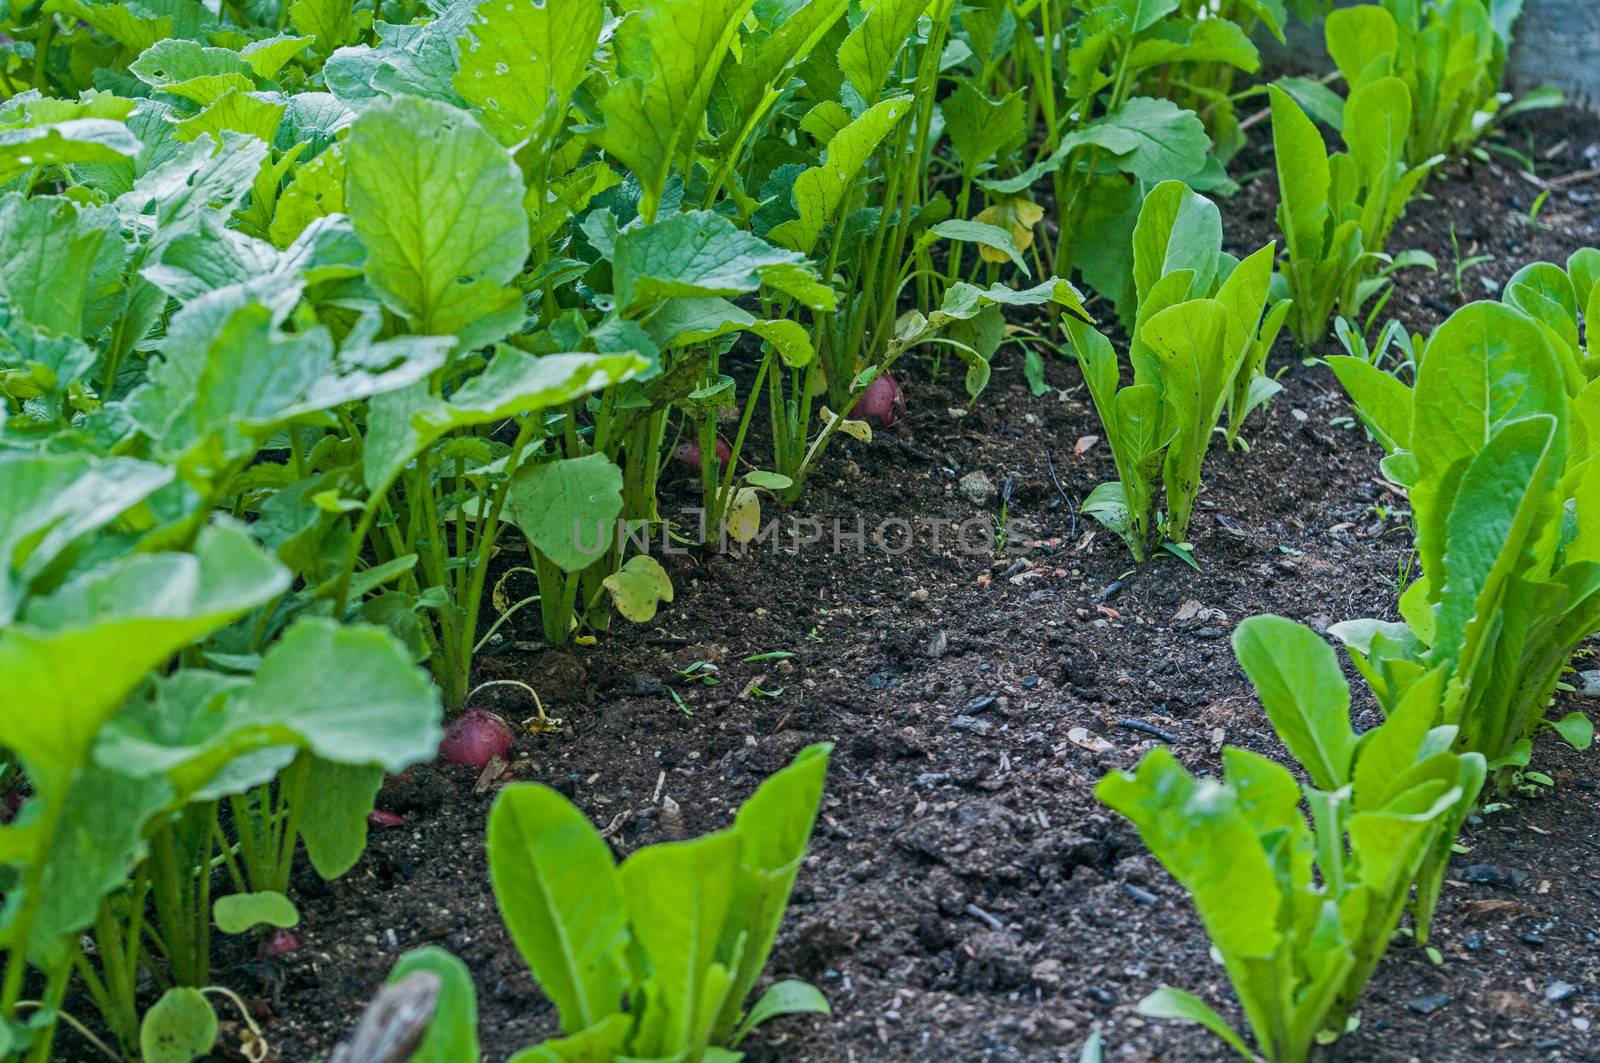 Rows of growing radish in a raised bed